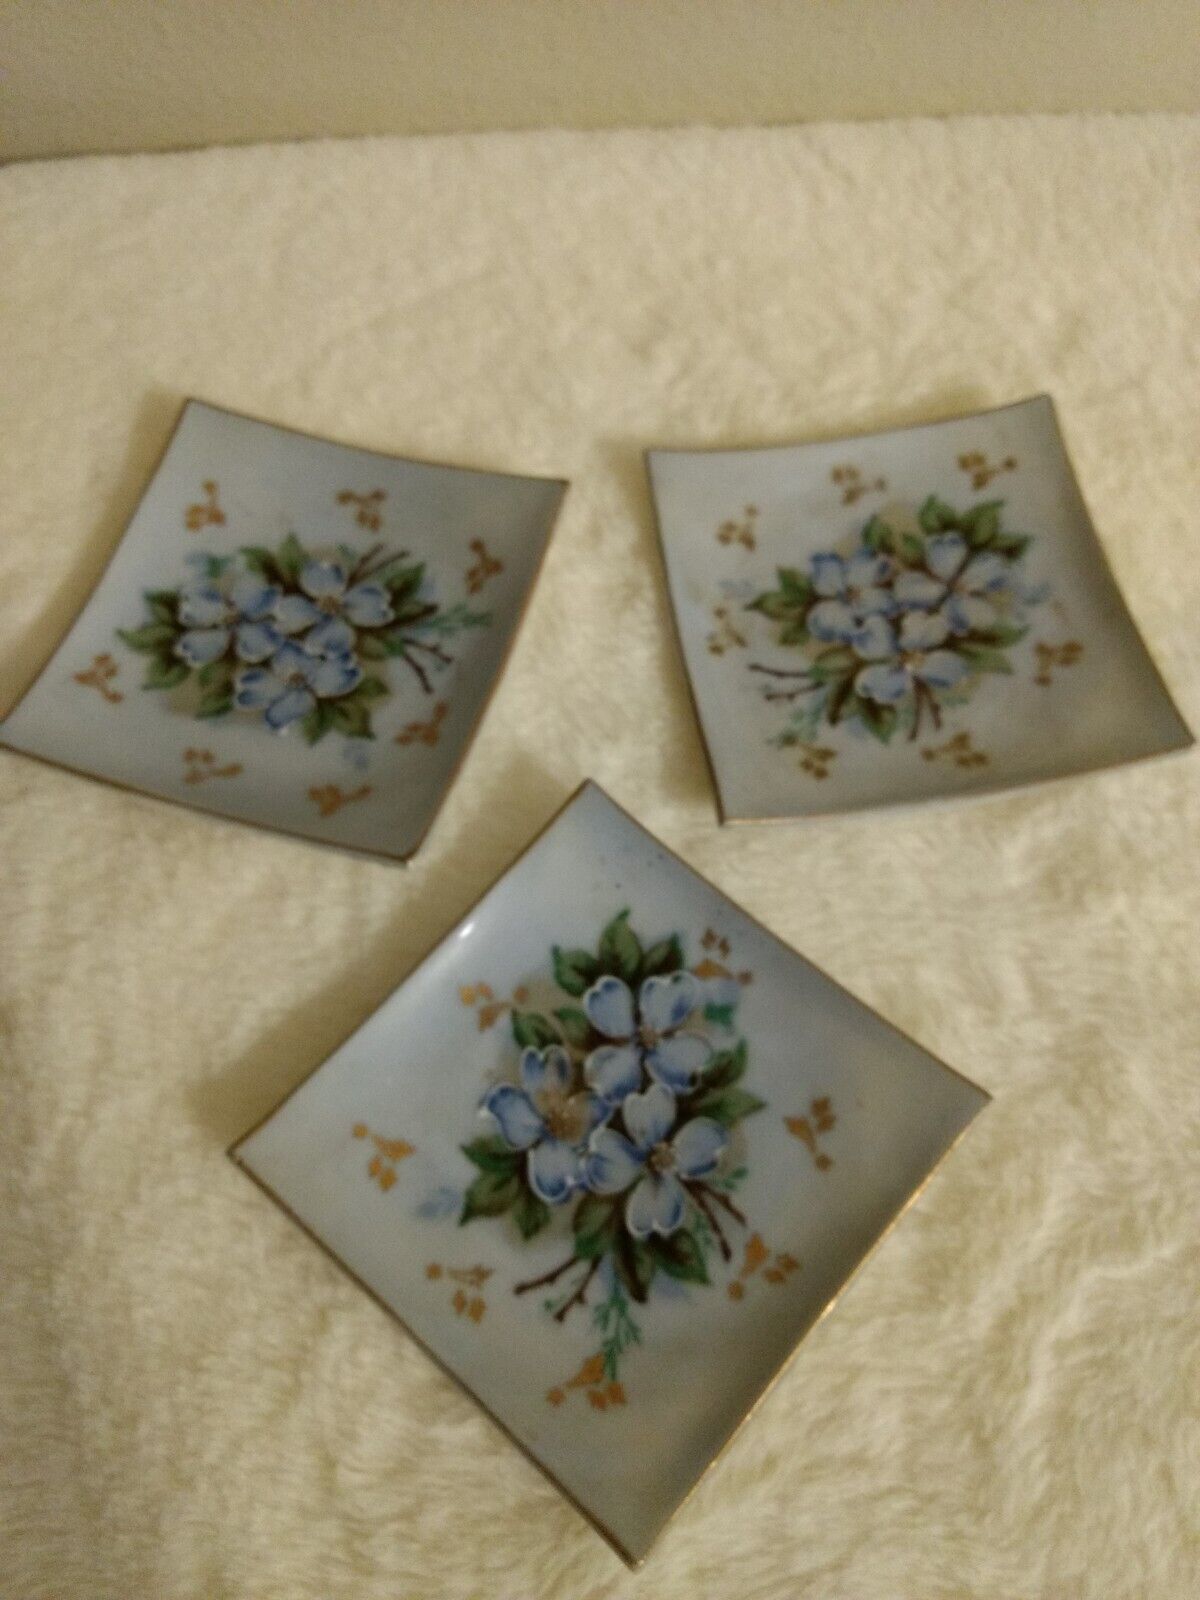 3 Small French Square Porcelain Plates/dishes Purple Floral Designed 3.5"